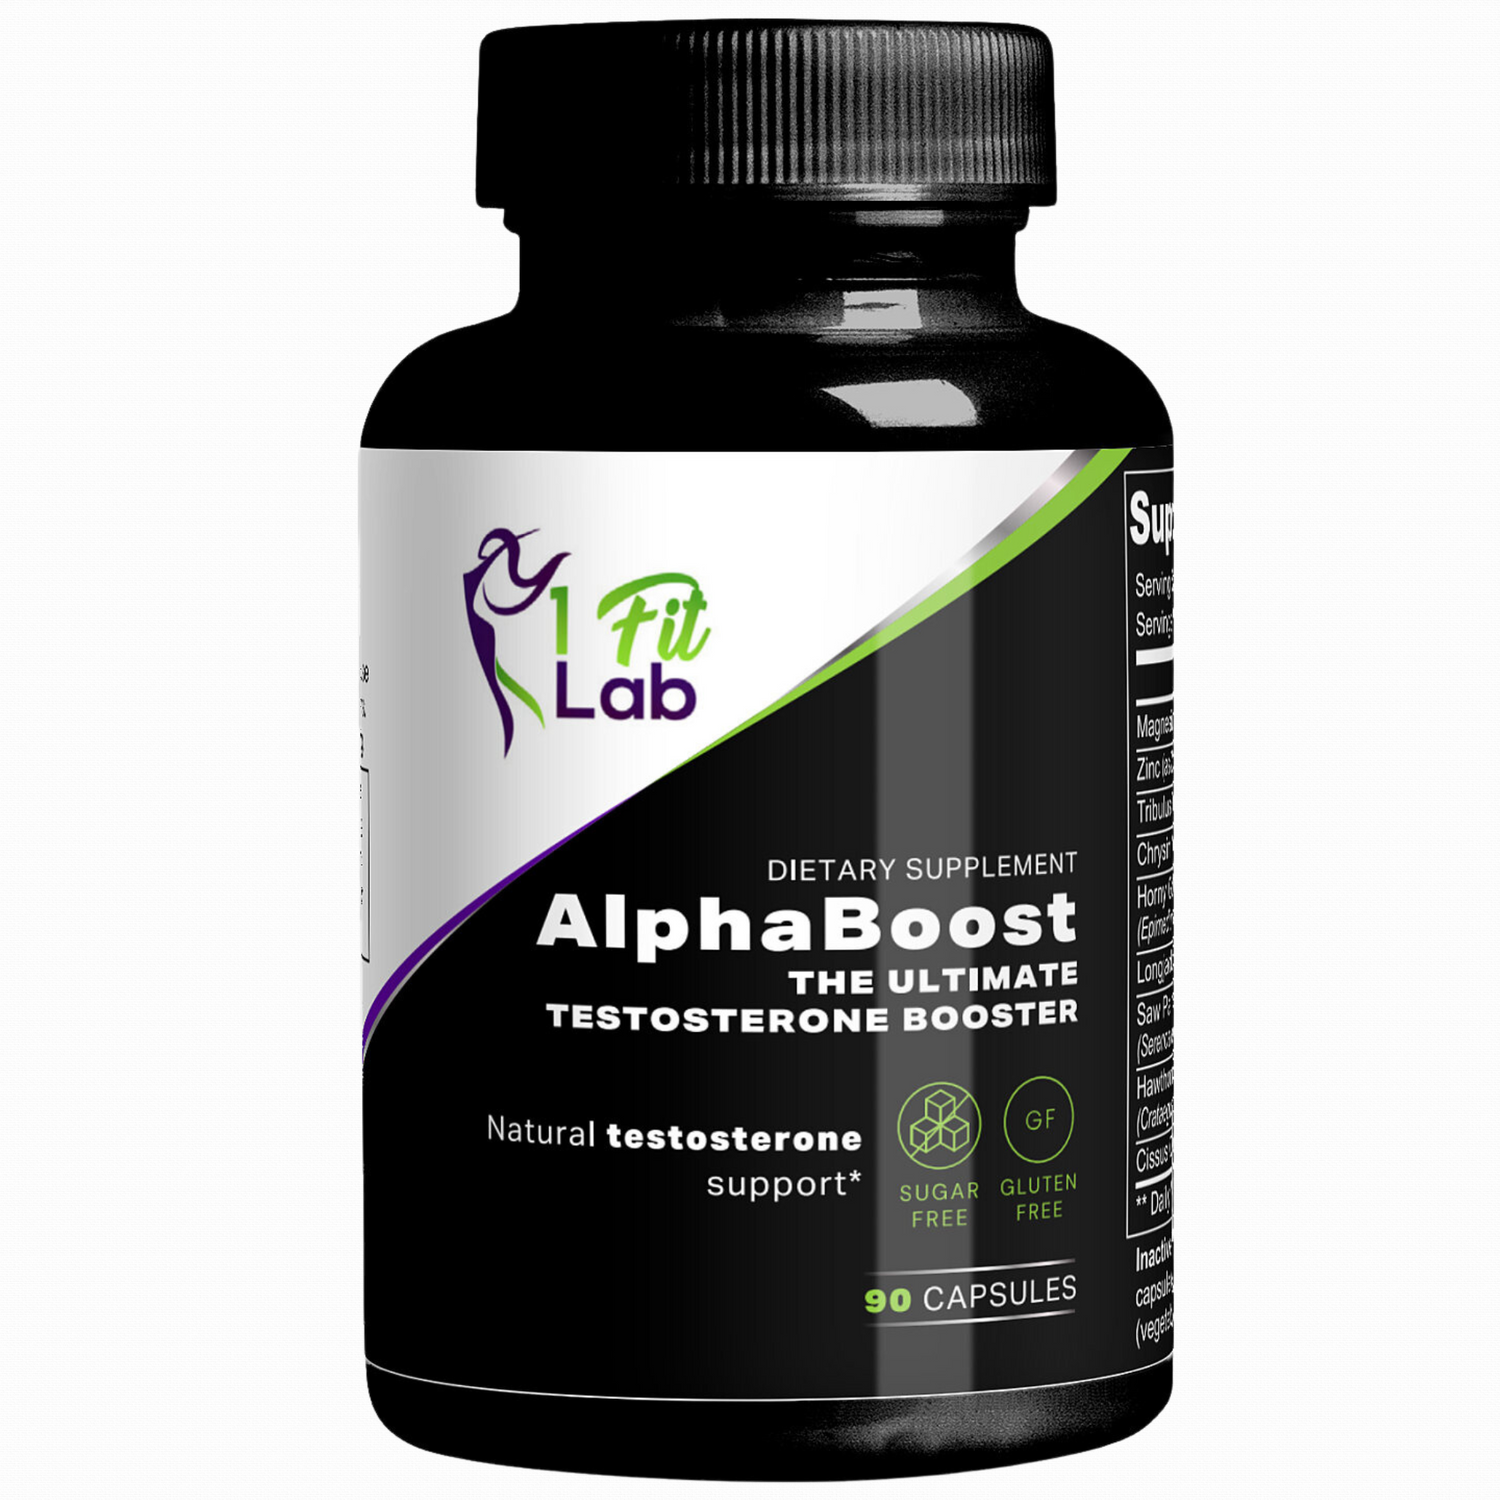 AlphaBoost bottle and capsules for natural testosterone enhancement